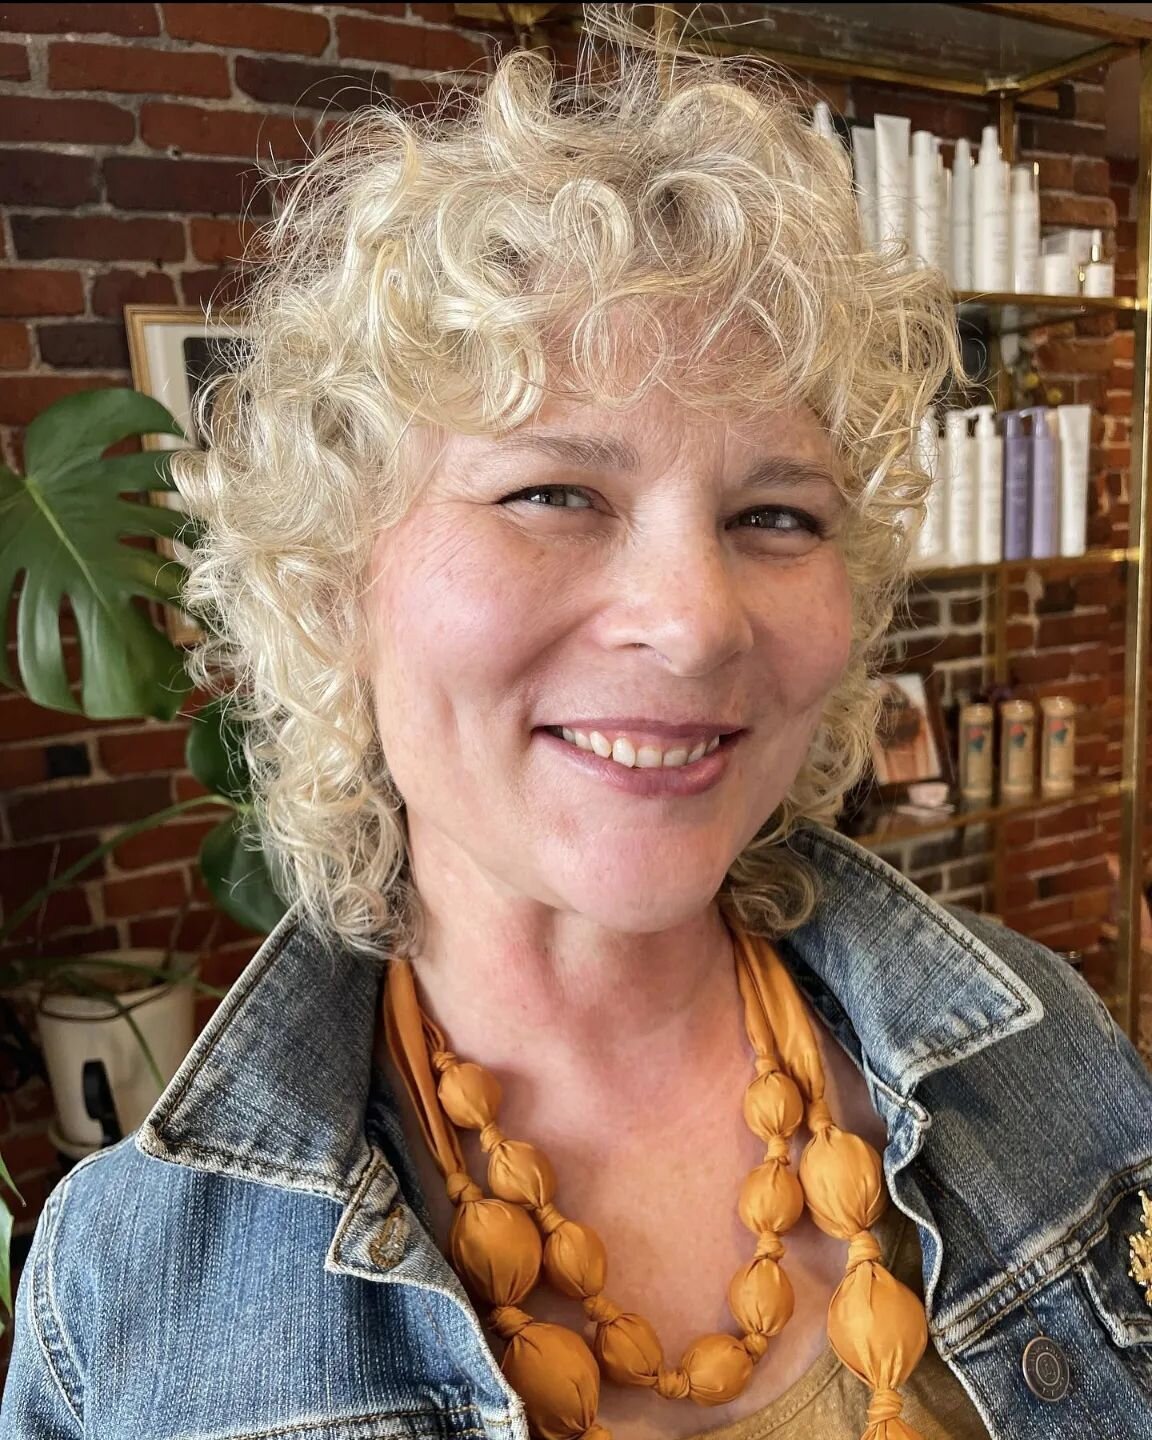 @lamonhair 's gorgeous client giving sunshine + glorious &quot;infinity curls&quot; after a dry shaping + style ✨♾️♾️♾️✨
.
.
.
.
.
#wildoffering #portlandme #portlandmehair #portlandmesalon #mainesalon #mainehairstylist #maine #hairstylist #holisticw